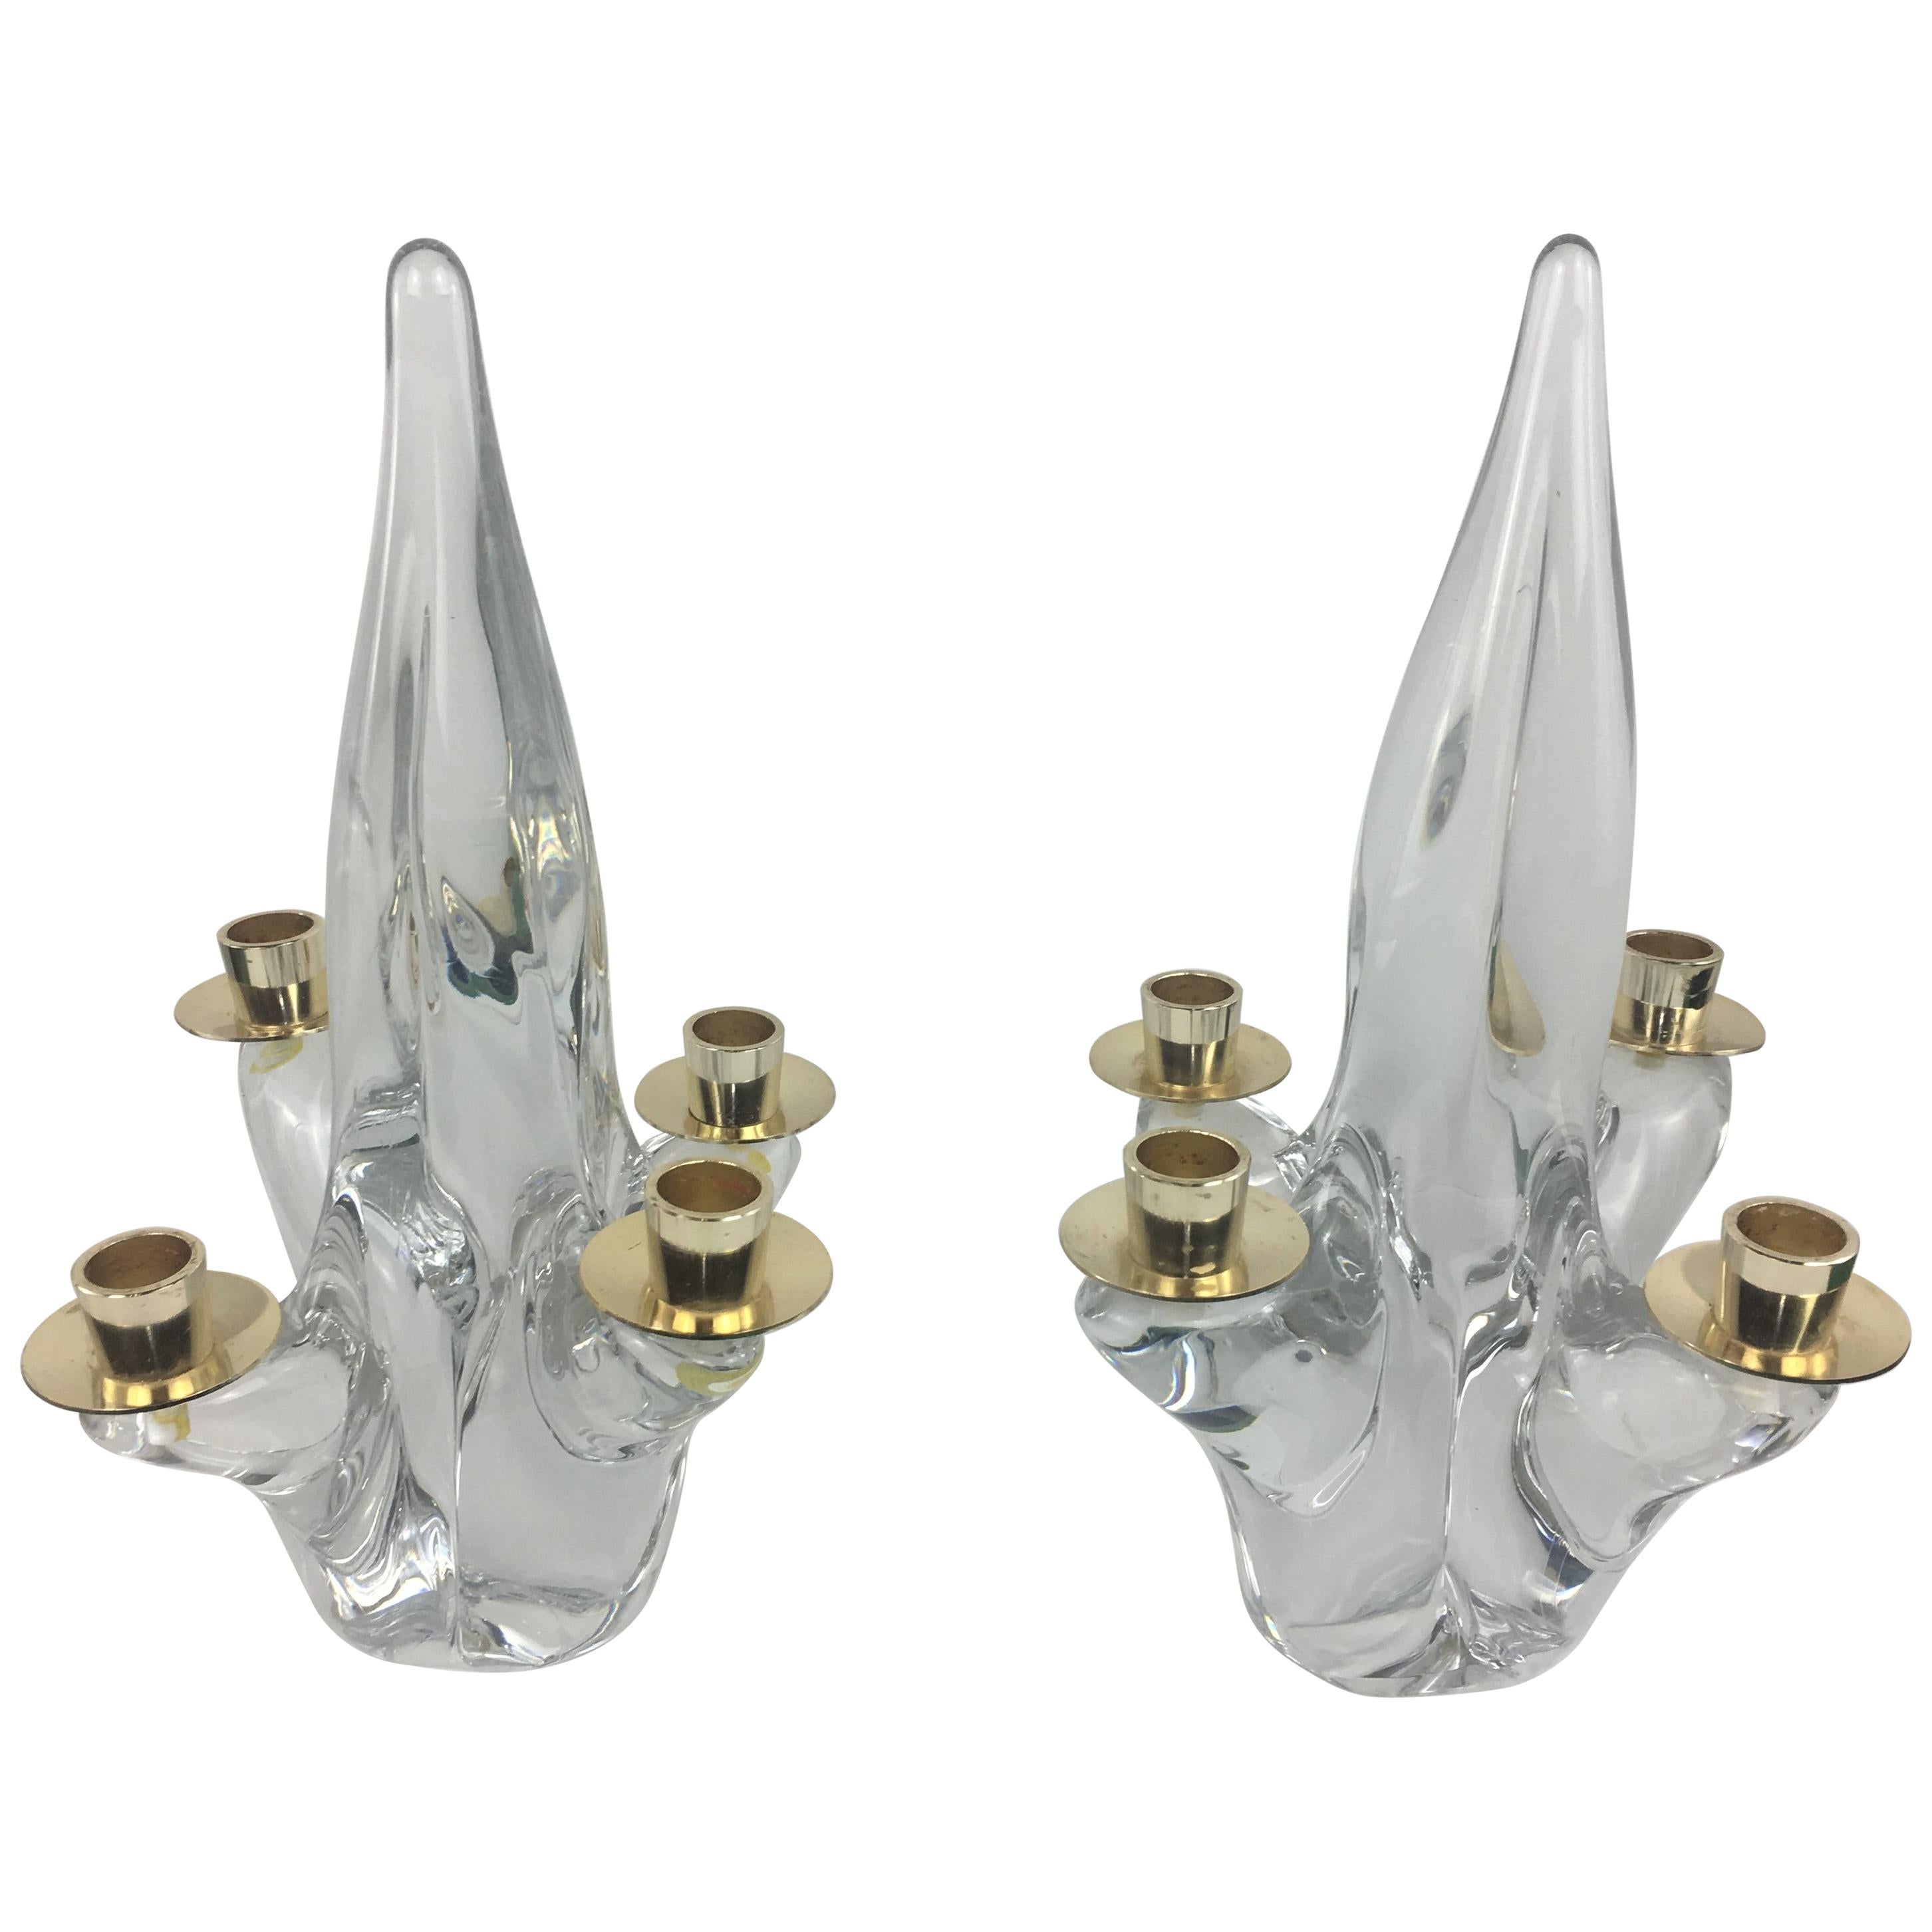 Pair of French Midcentury Crystal Candleholders by Schneider